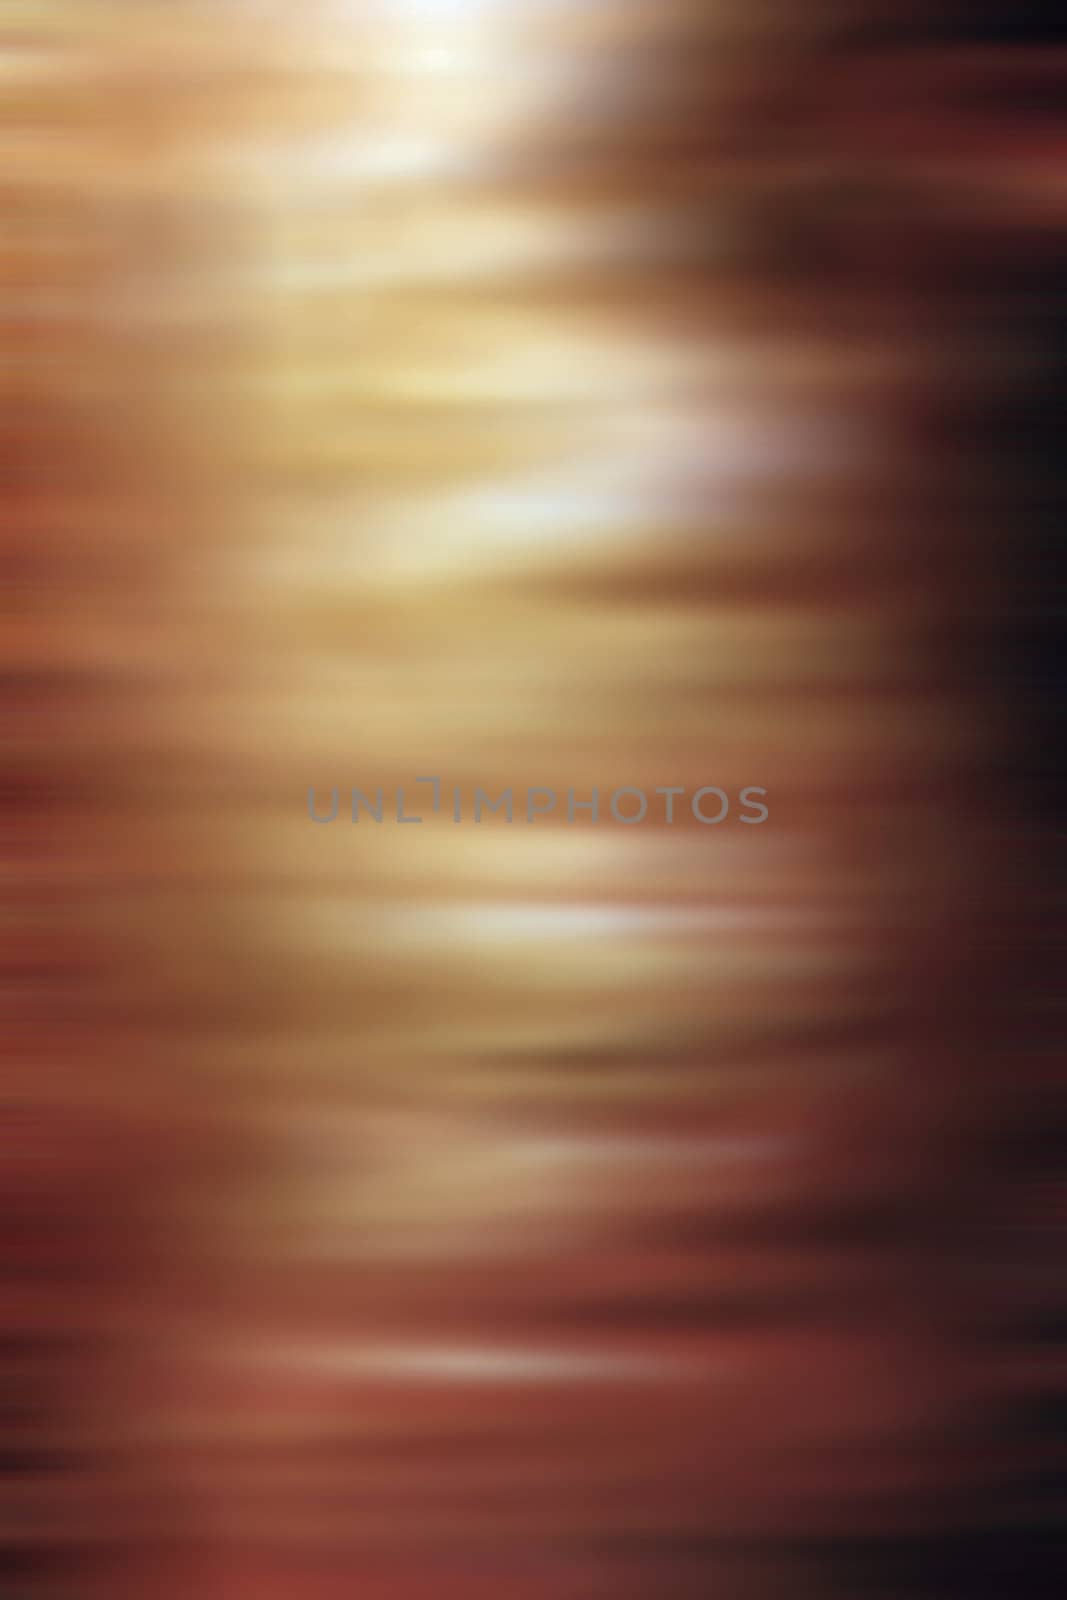 A blurred abstract background of warm brown and tan tones.
